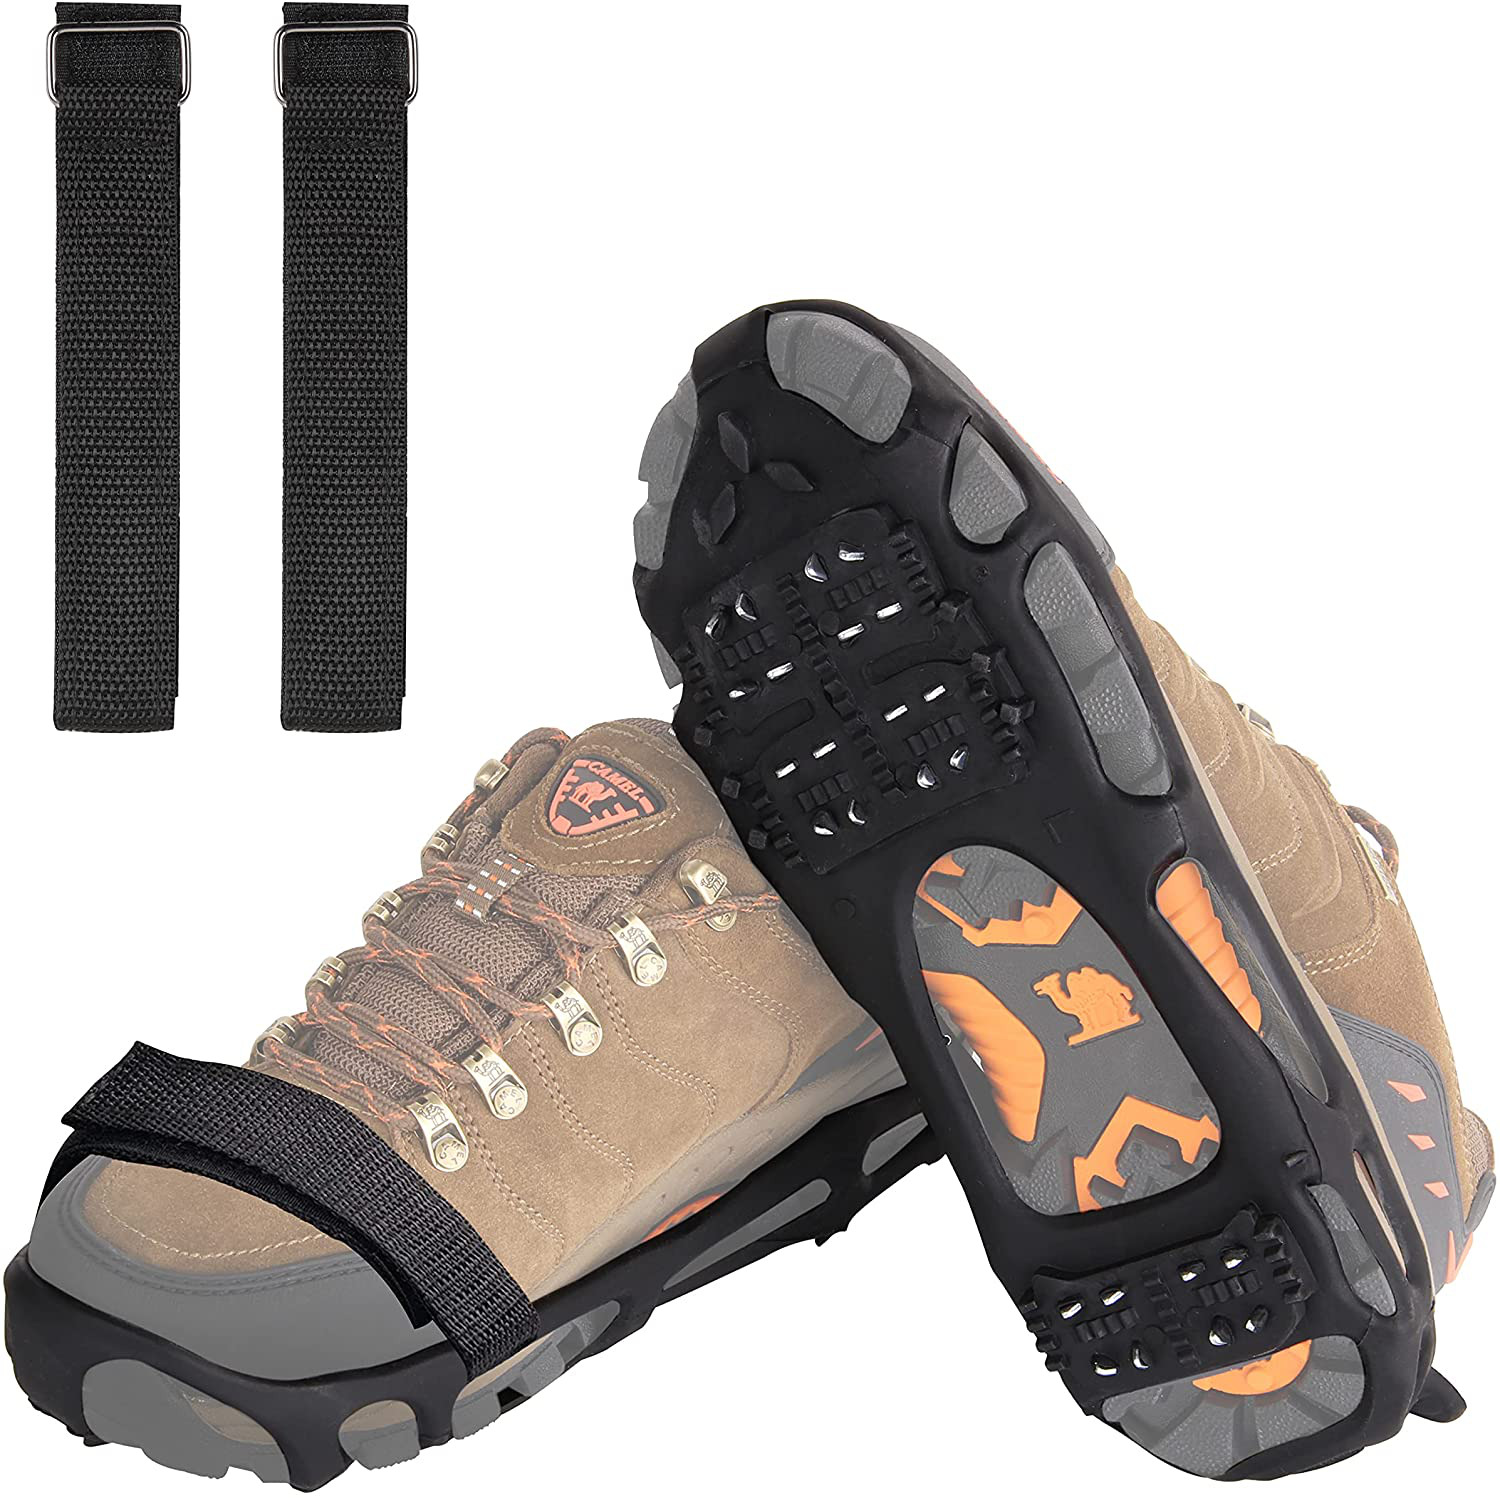 Ice Snow Cleats Crampons for Shoes and Boots Anti Slip 24 Spikes Snow Grips for